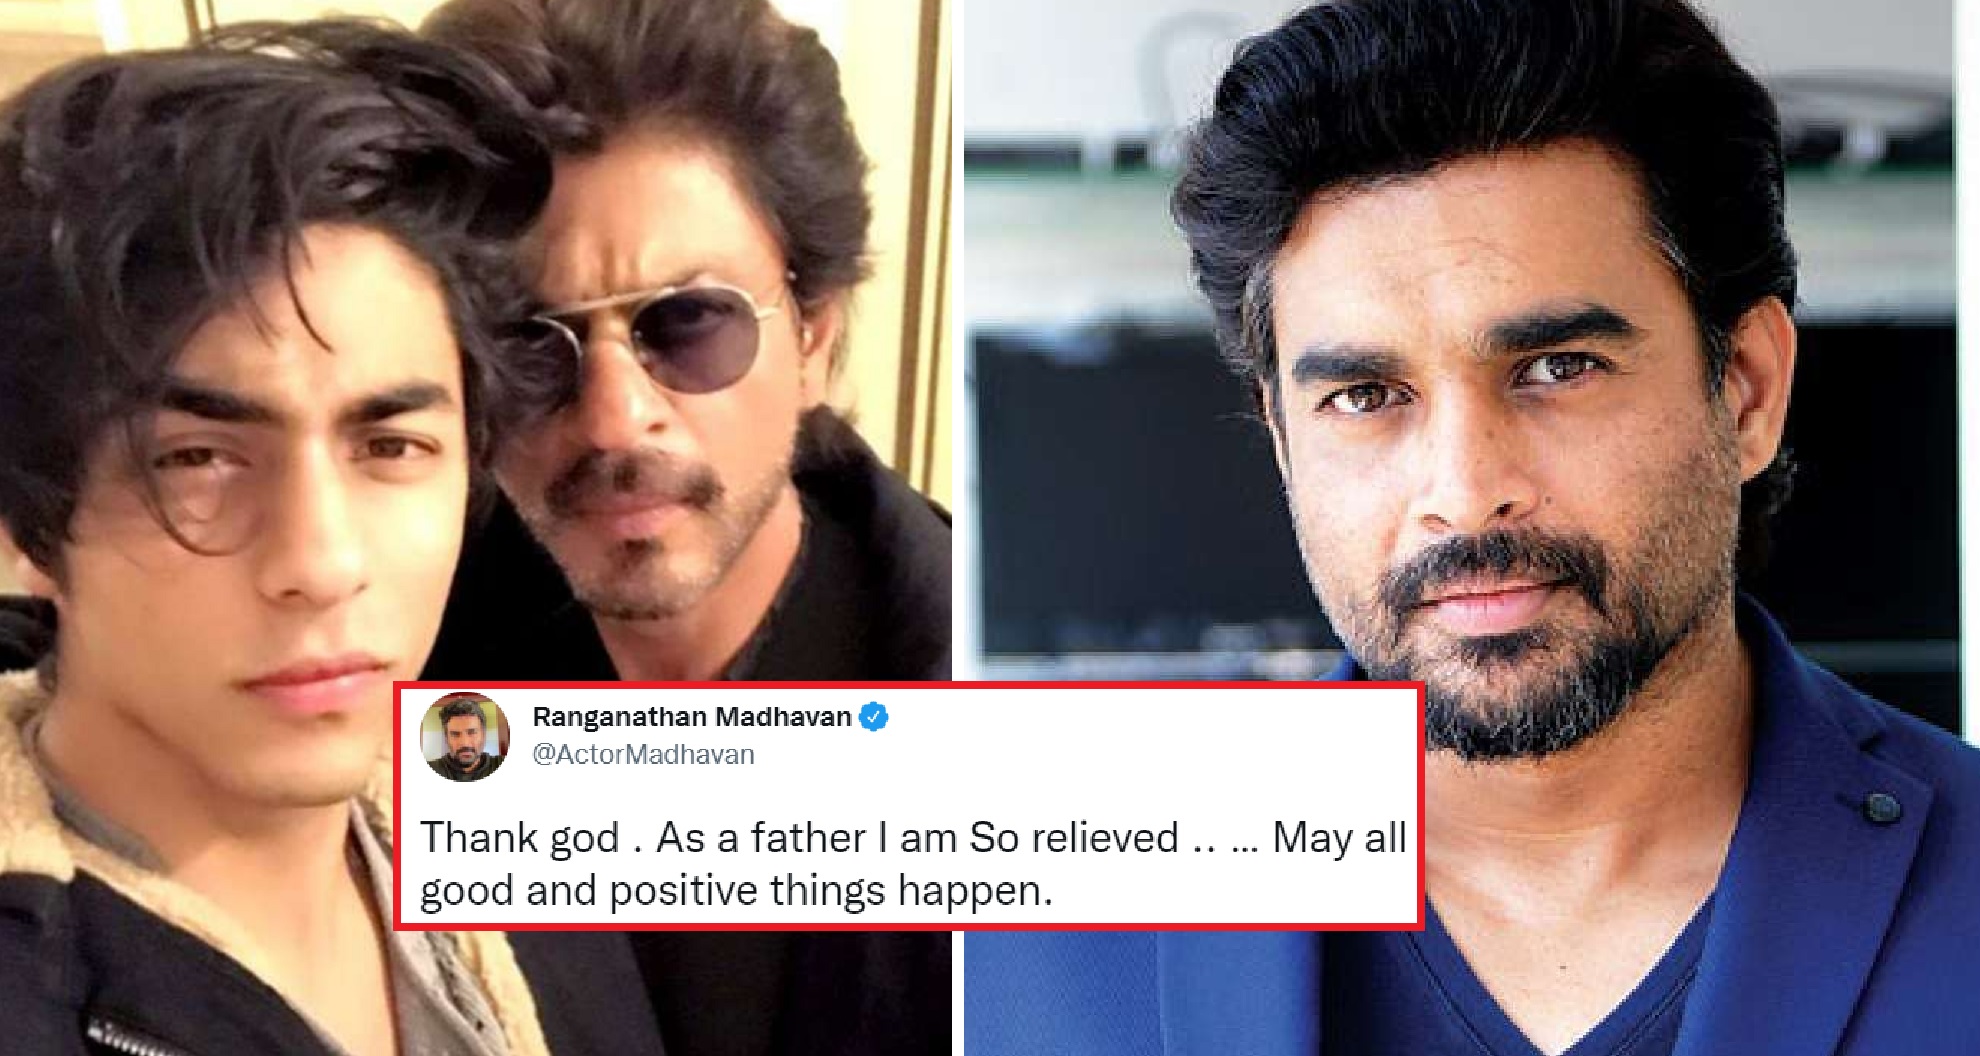 R. Madhavan Reacts On Aryan Khan’s Bail, Says ‘As a father I am So relieved’